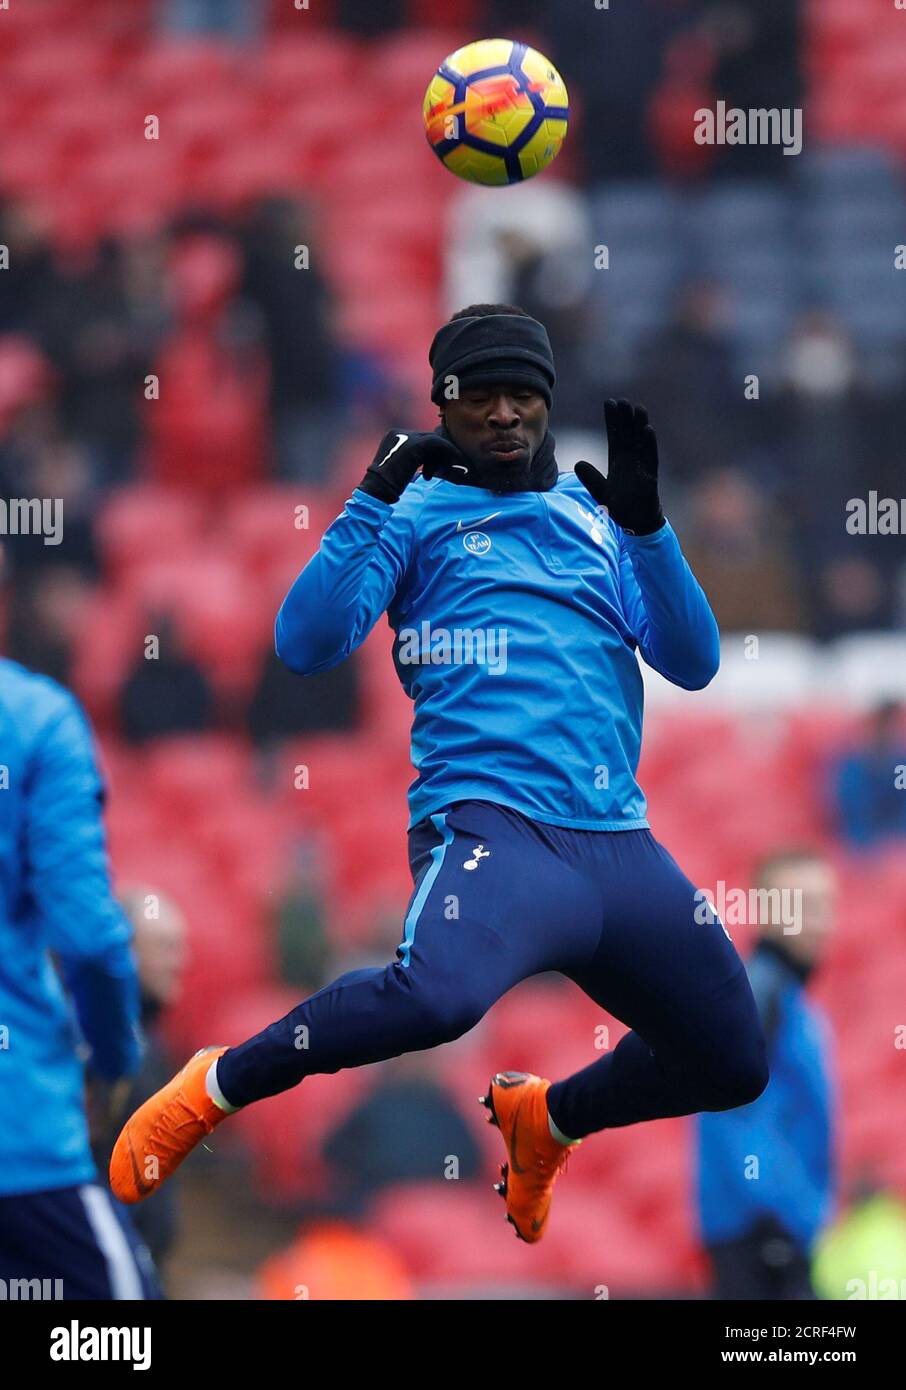 Soccer Football - Premier League - Tottenham Hotspur vs Huddersfield Town - Wembley Stadium, London, Britain - March 3, 2018   Tottenham's Serge Aurier warms up before the match    REUTERS/Eddie Keogh    EDITORIAL USE ONLY. No use with unauthorized audio, video, data, fixture lists, club/league logos or 'live' services. Online in-match use limited to 75 images, no video emulation. No use in betting, games or single club/league/player publications.  Please contact your account representative for further details. Stock Photo